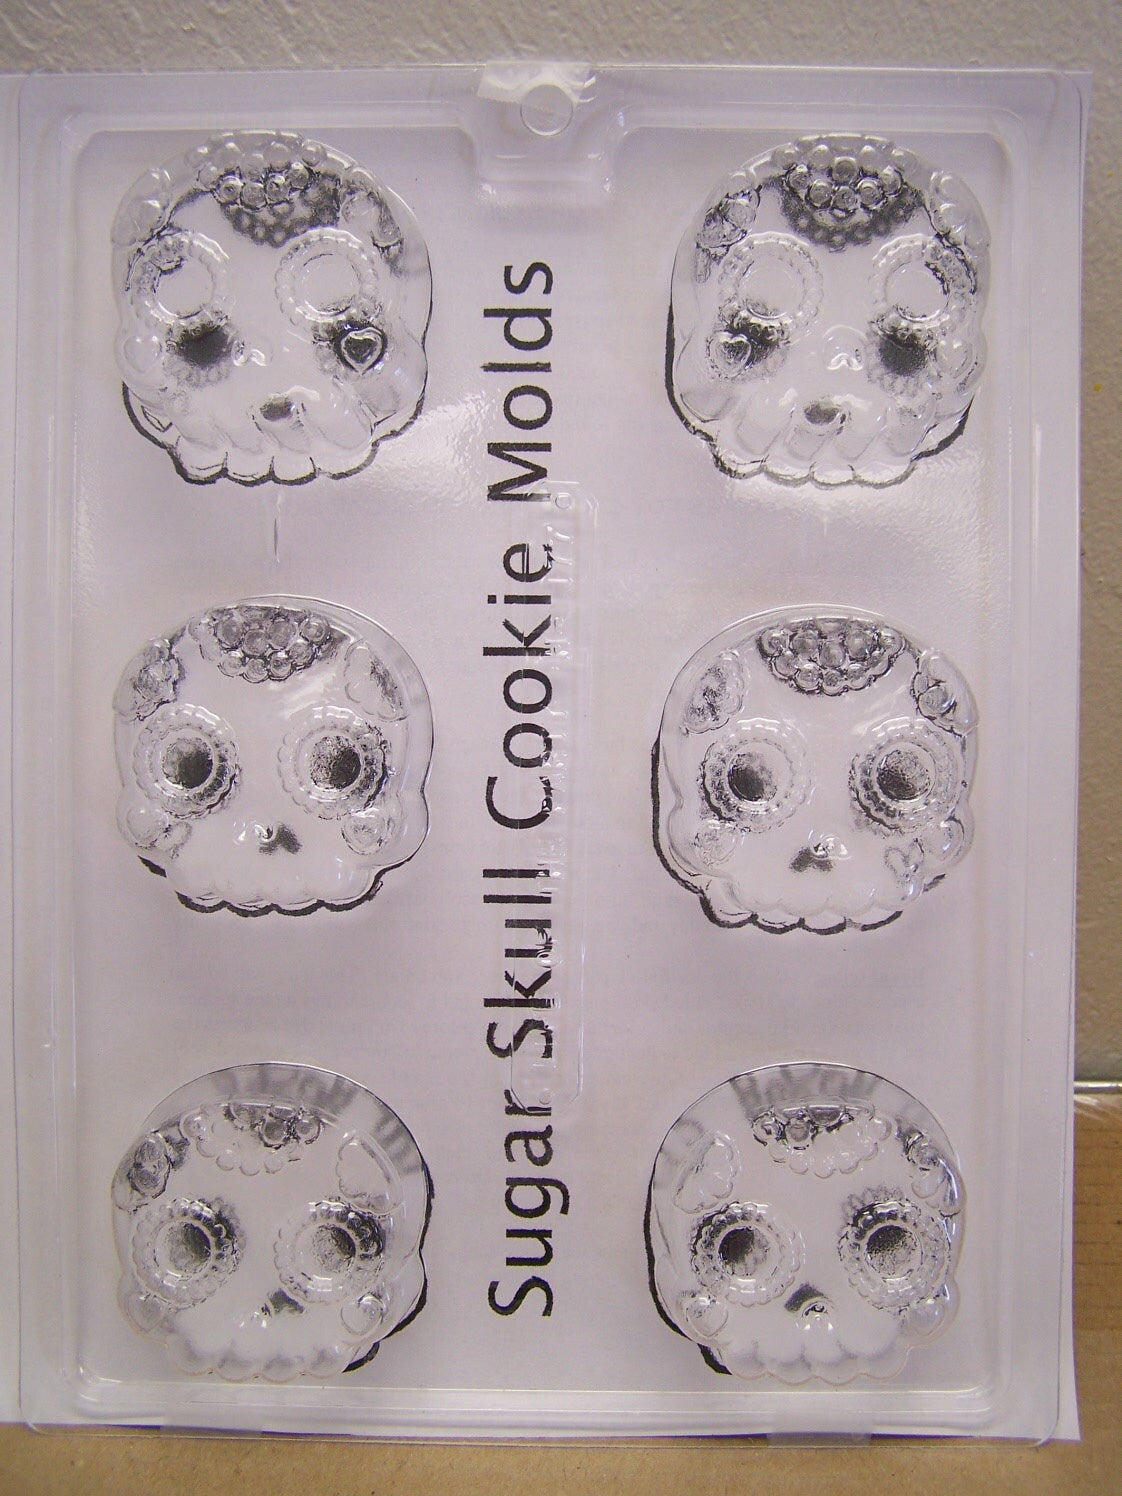 Suar Skull Detailed Cookie Cutter Molds - Day of the Dead - Cookies, Chocolate, Soap, etc.